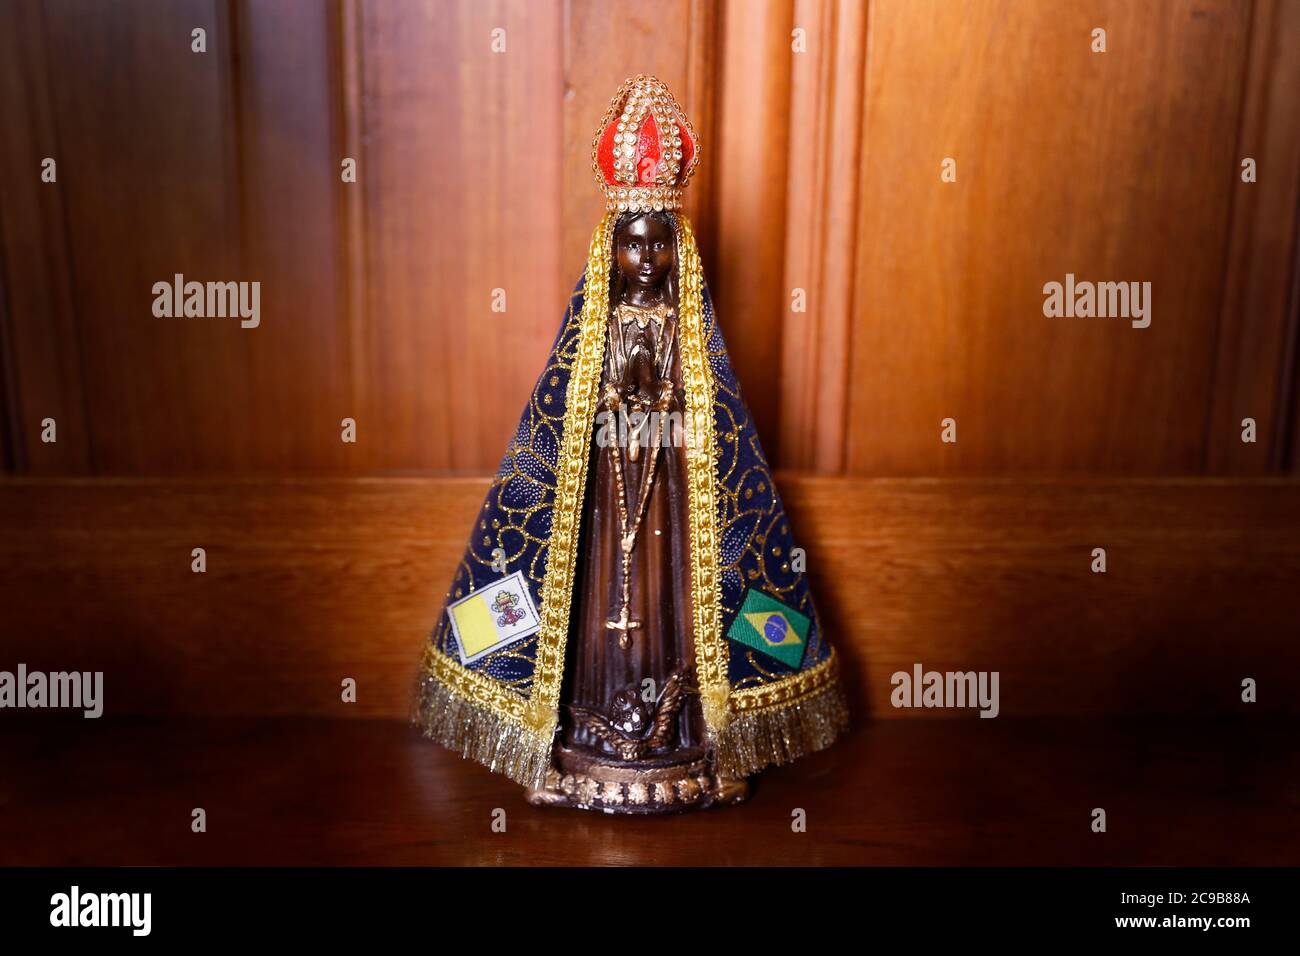 Statue of the image of Our Lady of Aparecida, mother of God in the Catholic religion Stock Photo